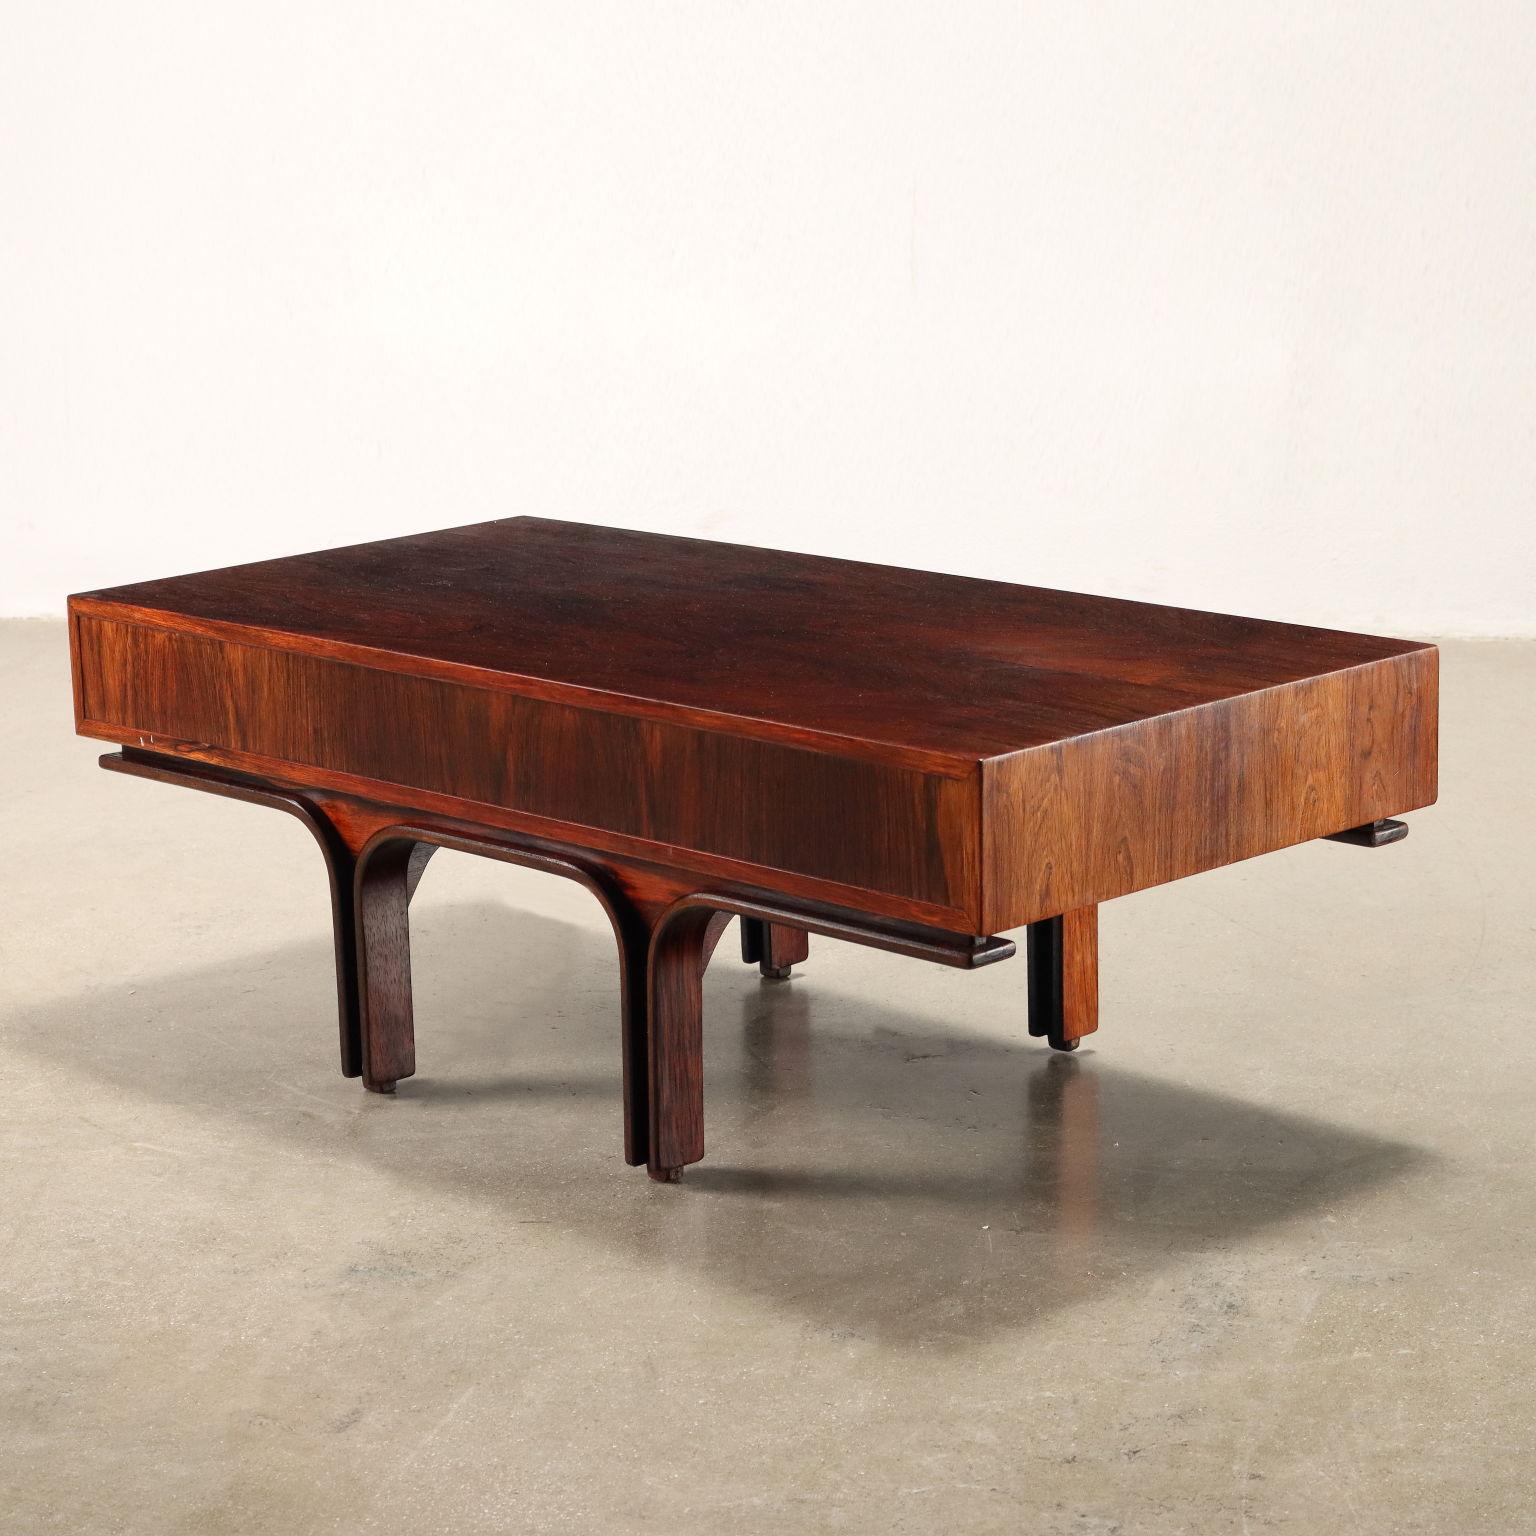 Wood Gianfranco Frattini Coffee Table with Three Drawers for Bernini, 1960s in wood For Sale